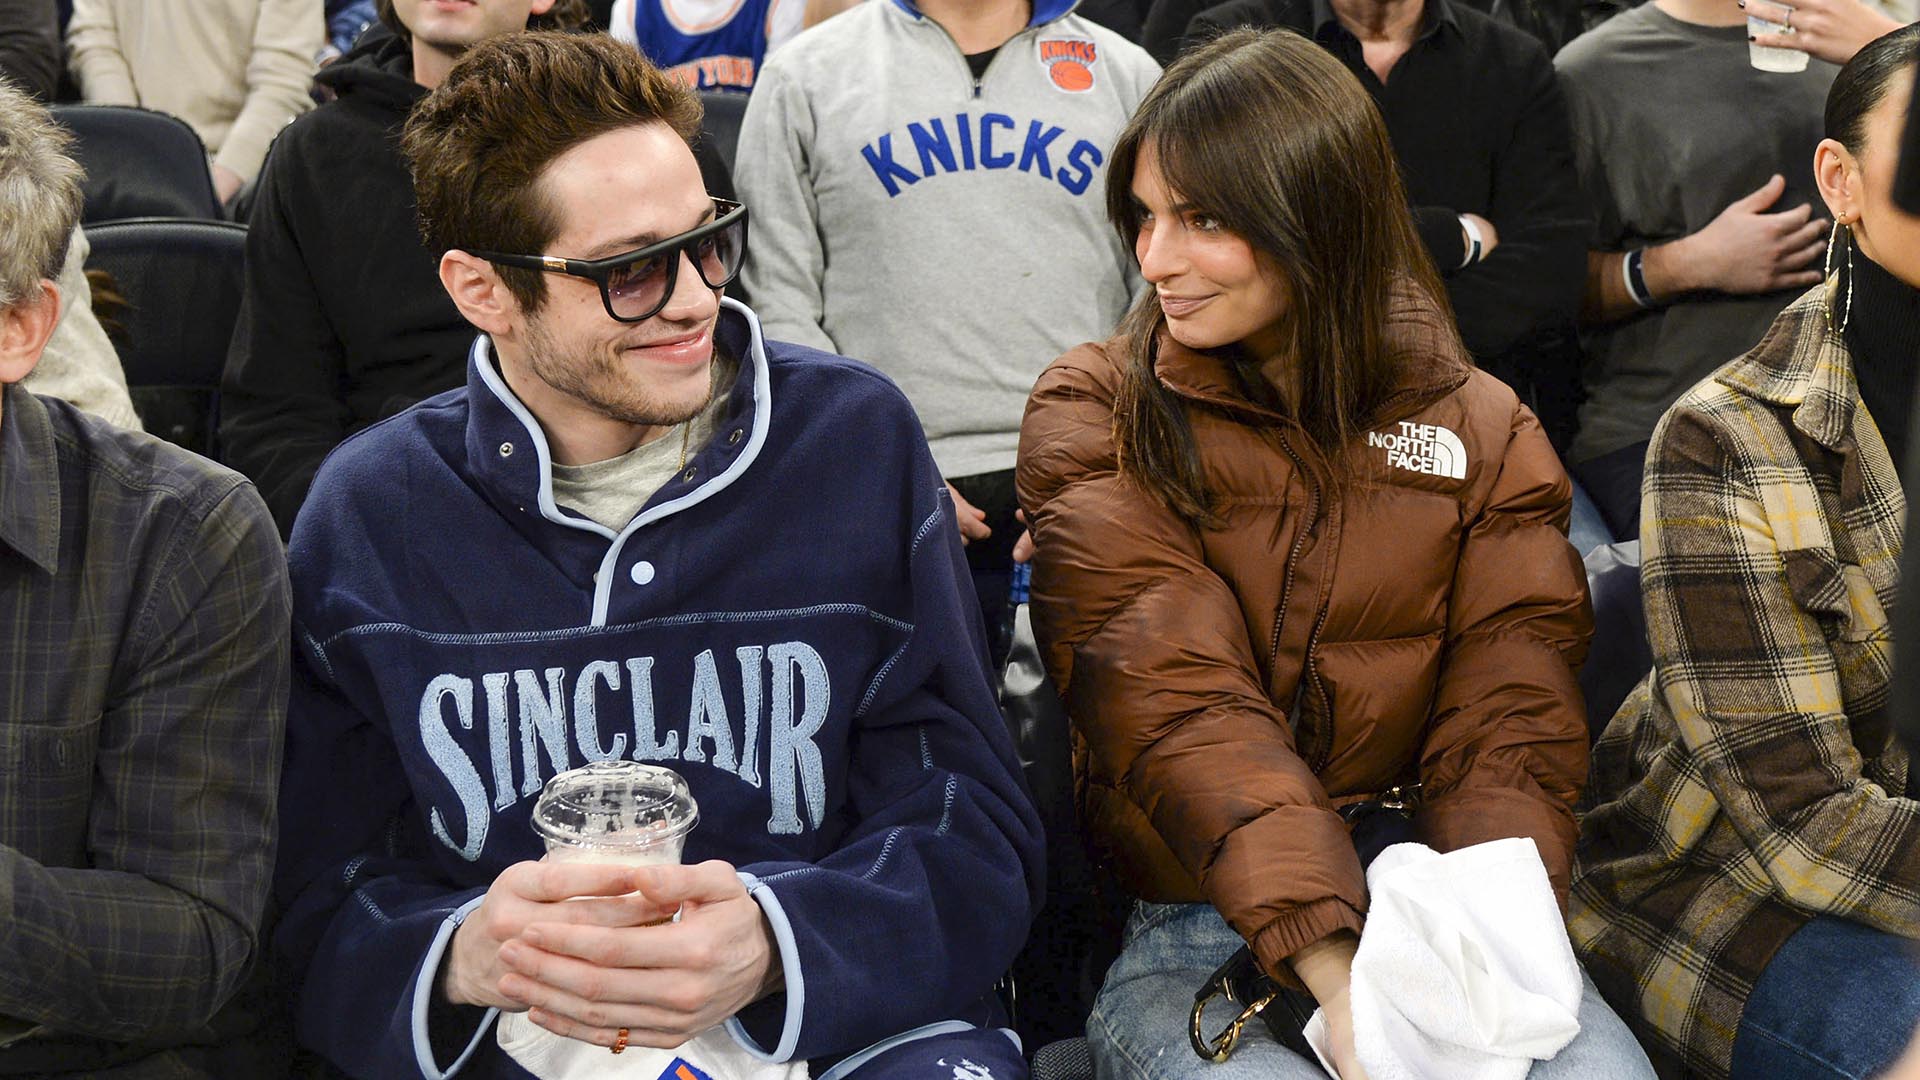 Photo © 2022 REX Features/Shutterstock /The Grosby Group 27 NOVEMBER 2022 New York, NY - Pete Davidson and Emily Ratajkowski are all smiles as they attend the Grizzlies vs Knicks game at Madison Square Garden together.**** Pete Davidson and Emily Ratajkowski they smile as they attend the Grizzlies vs. Knicks game together at Madison Square Garden.